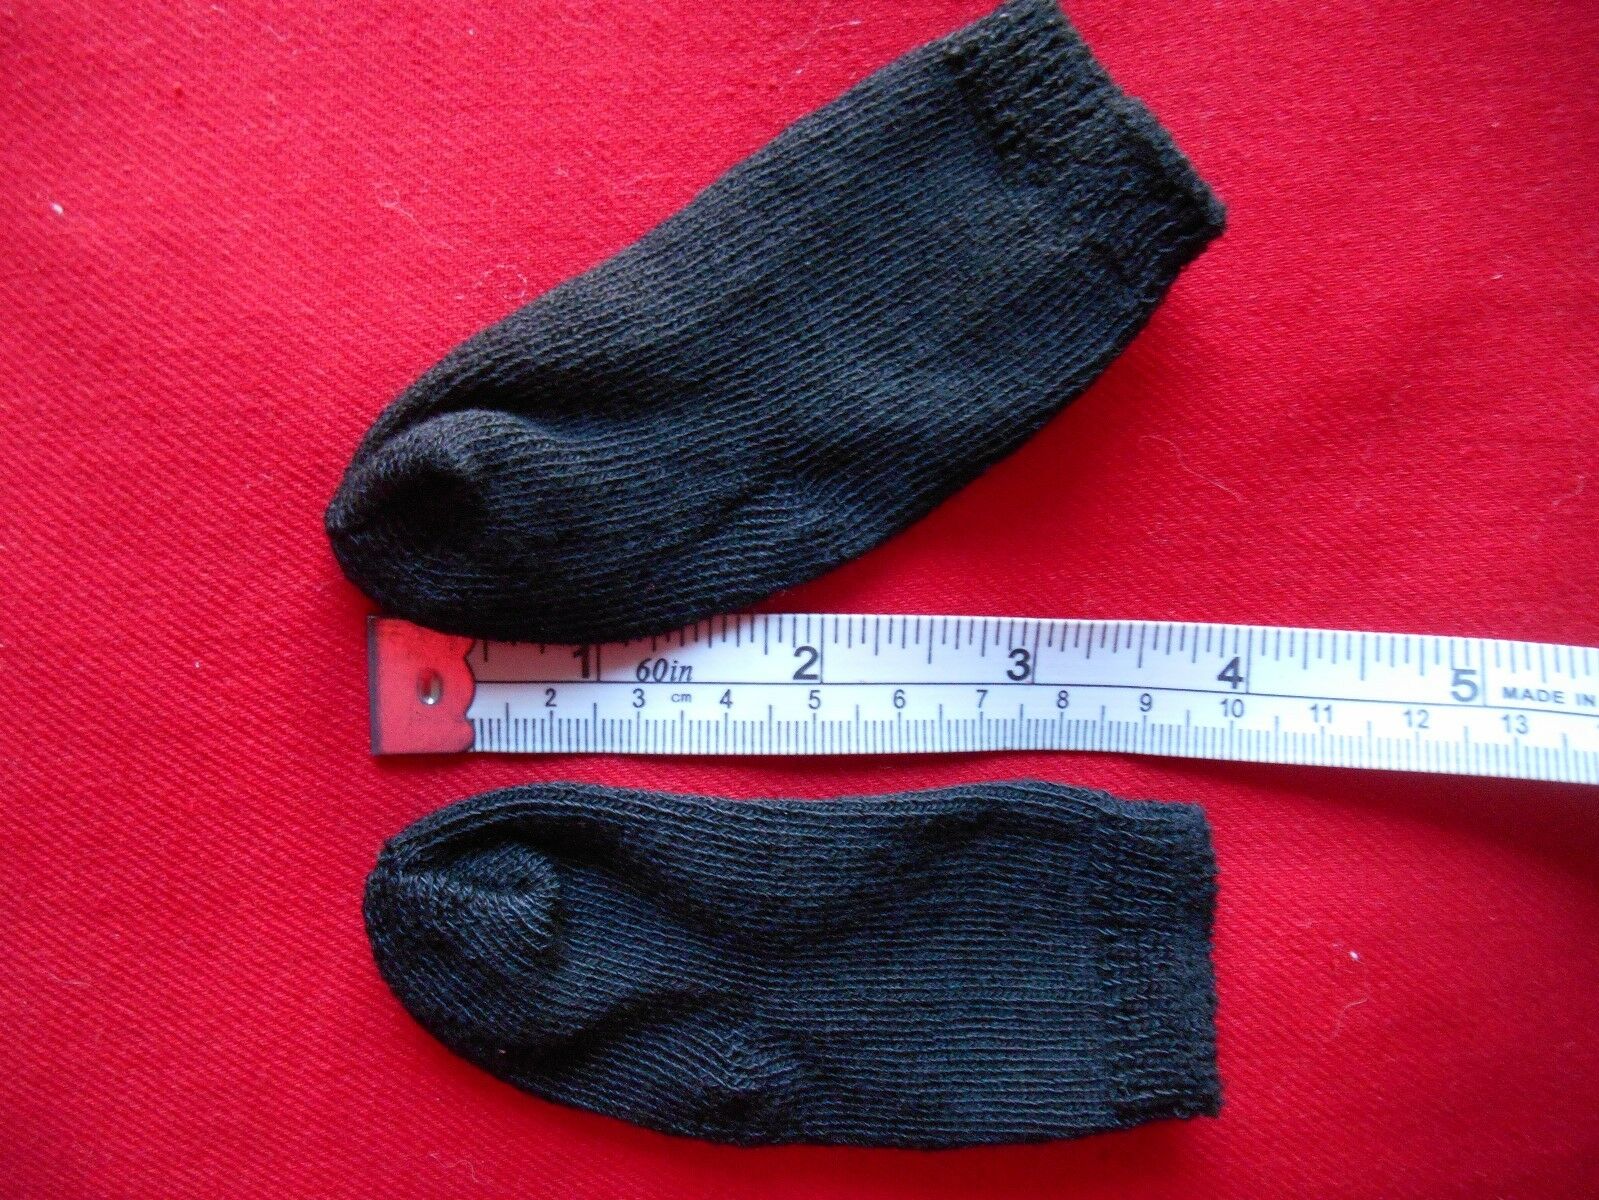 Doll Clothes Under Garment Dress Black Socks 2 1/2in Sole For Baby Boy